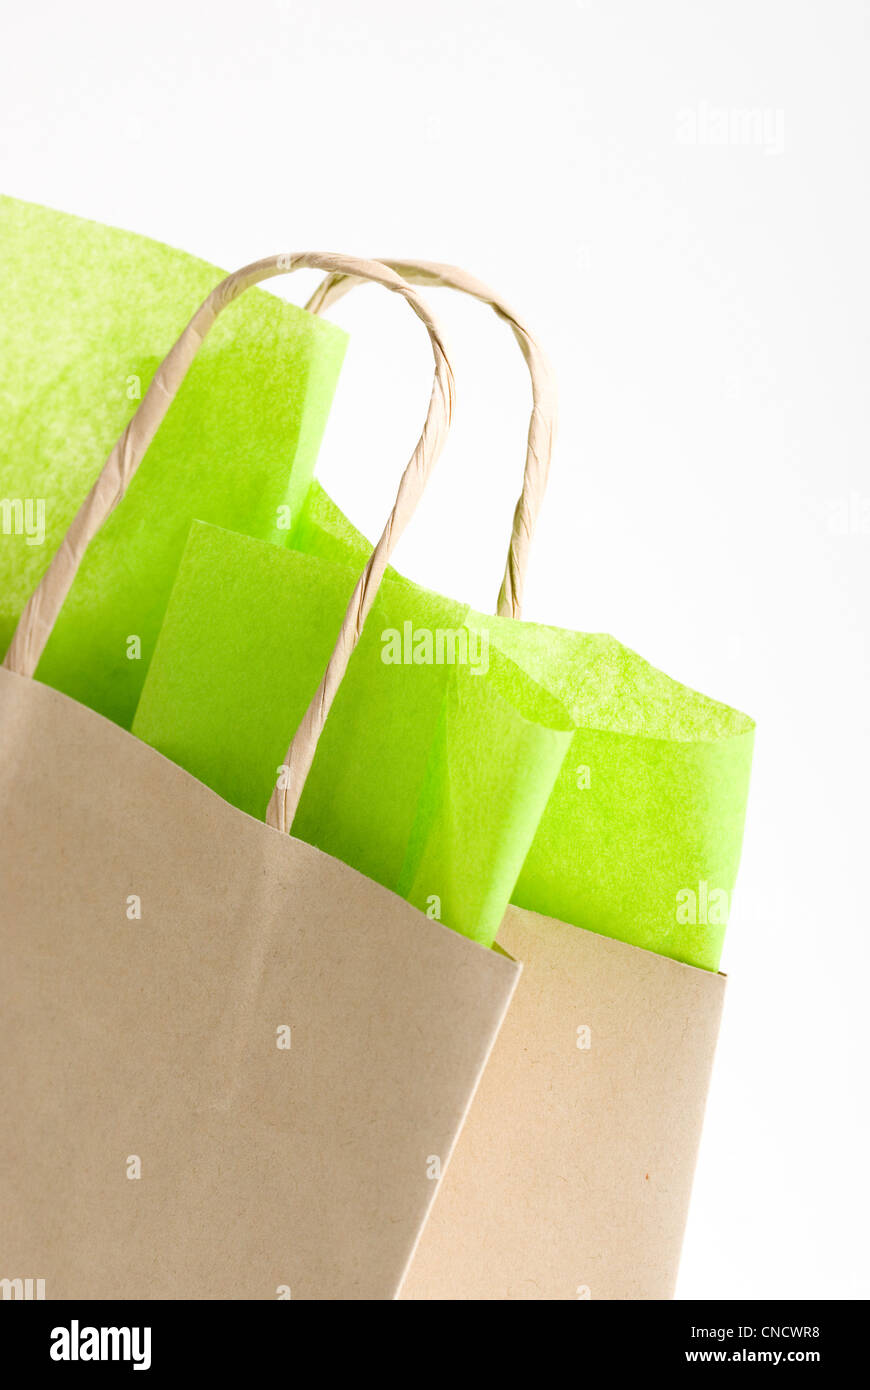 Colorful Isolated Gift Bags With Tissue Paper Stock Photo